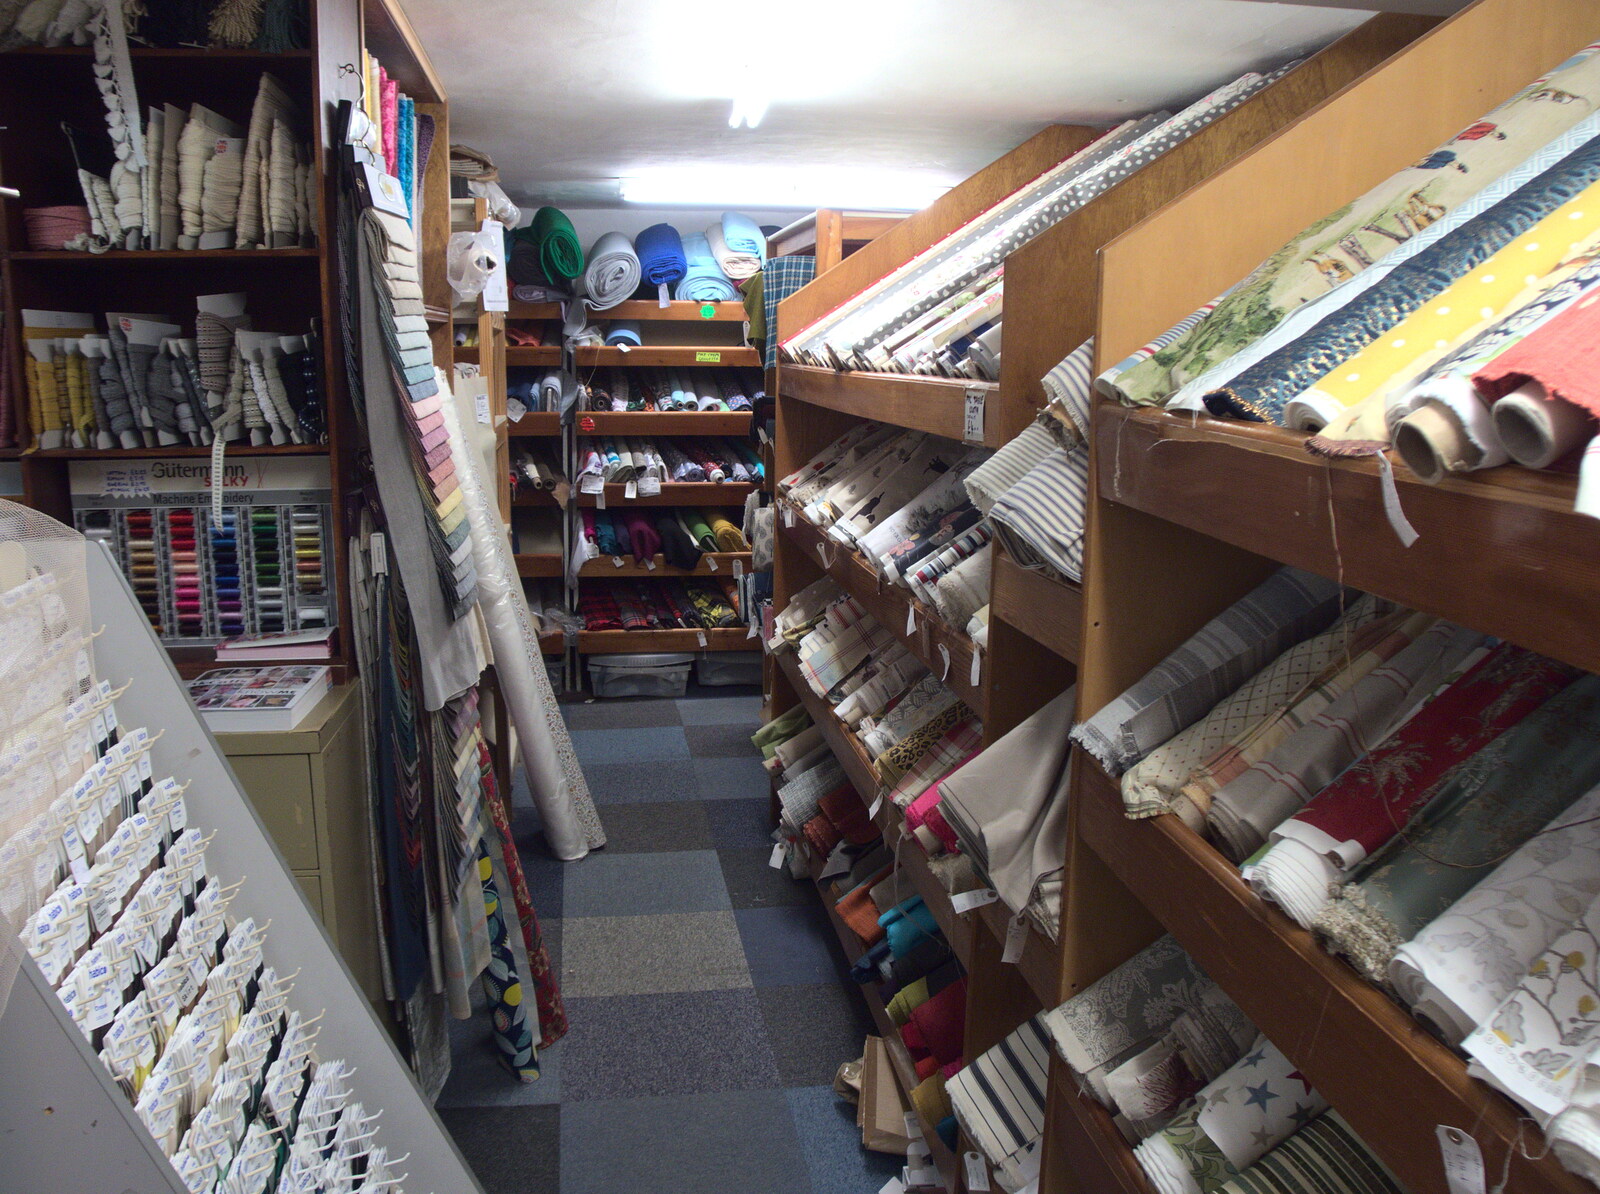 A Wander around Fair Green, Diss, Norfolk - 11th January 2023: The Aladdin's Cave of fabric in the Fabric Shop